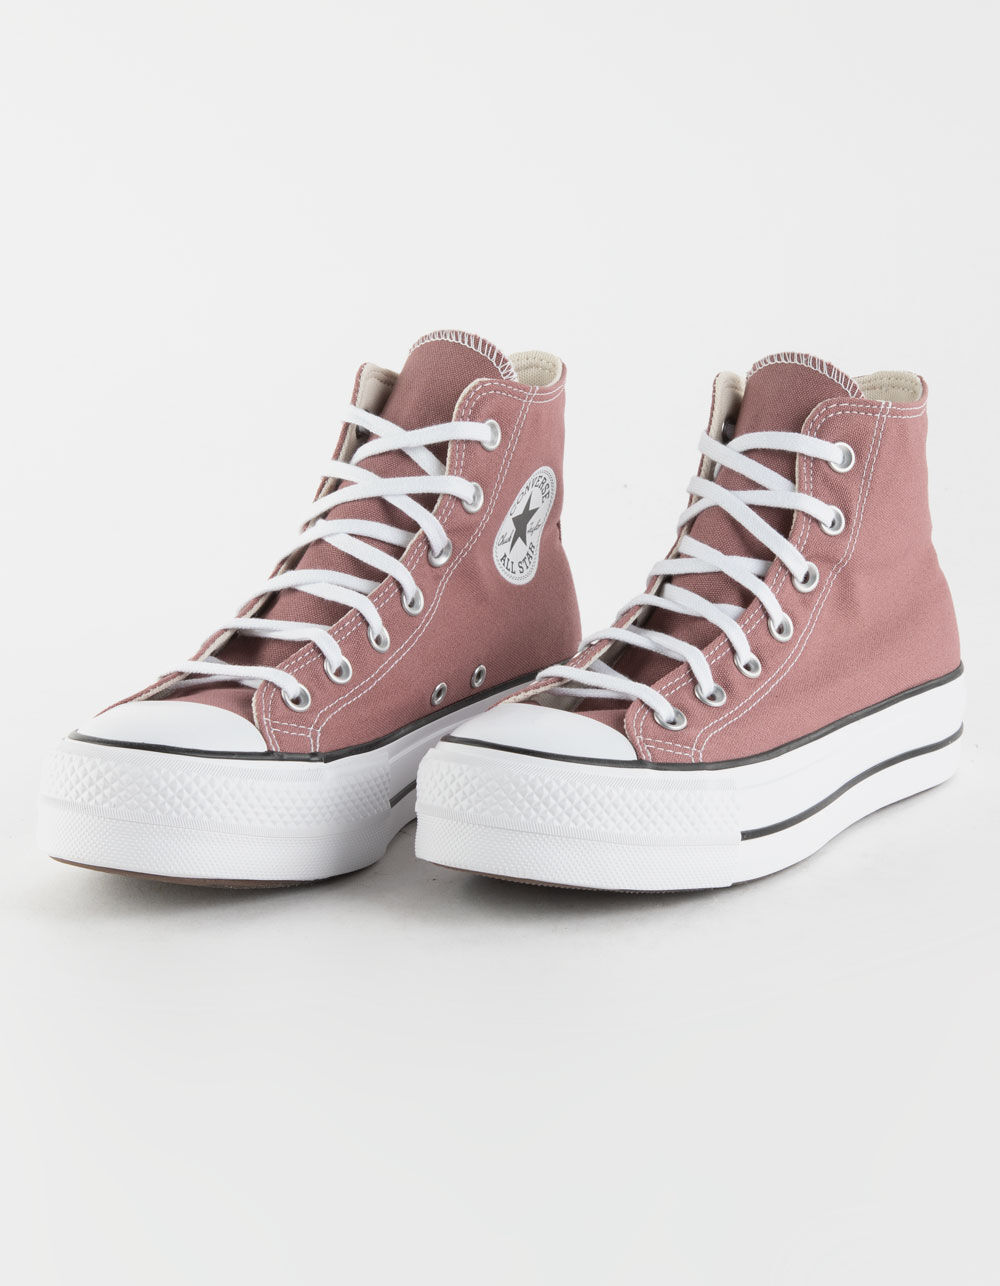 Converse Chuck Taylor All Star Dusty Pink Womens High Top Platform Shoes | Holid